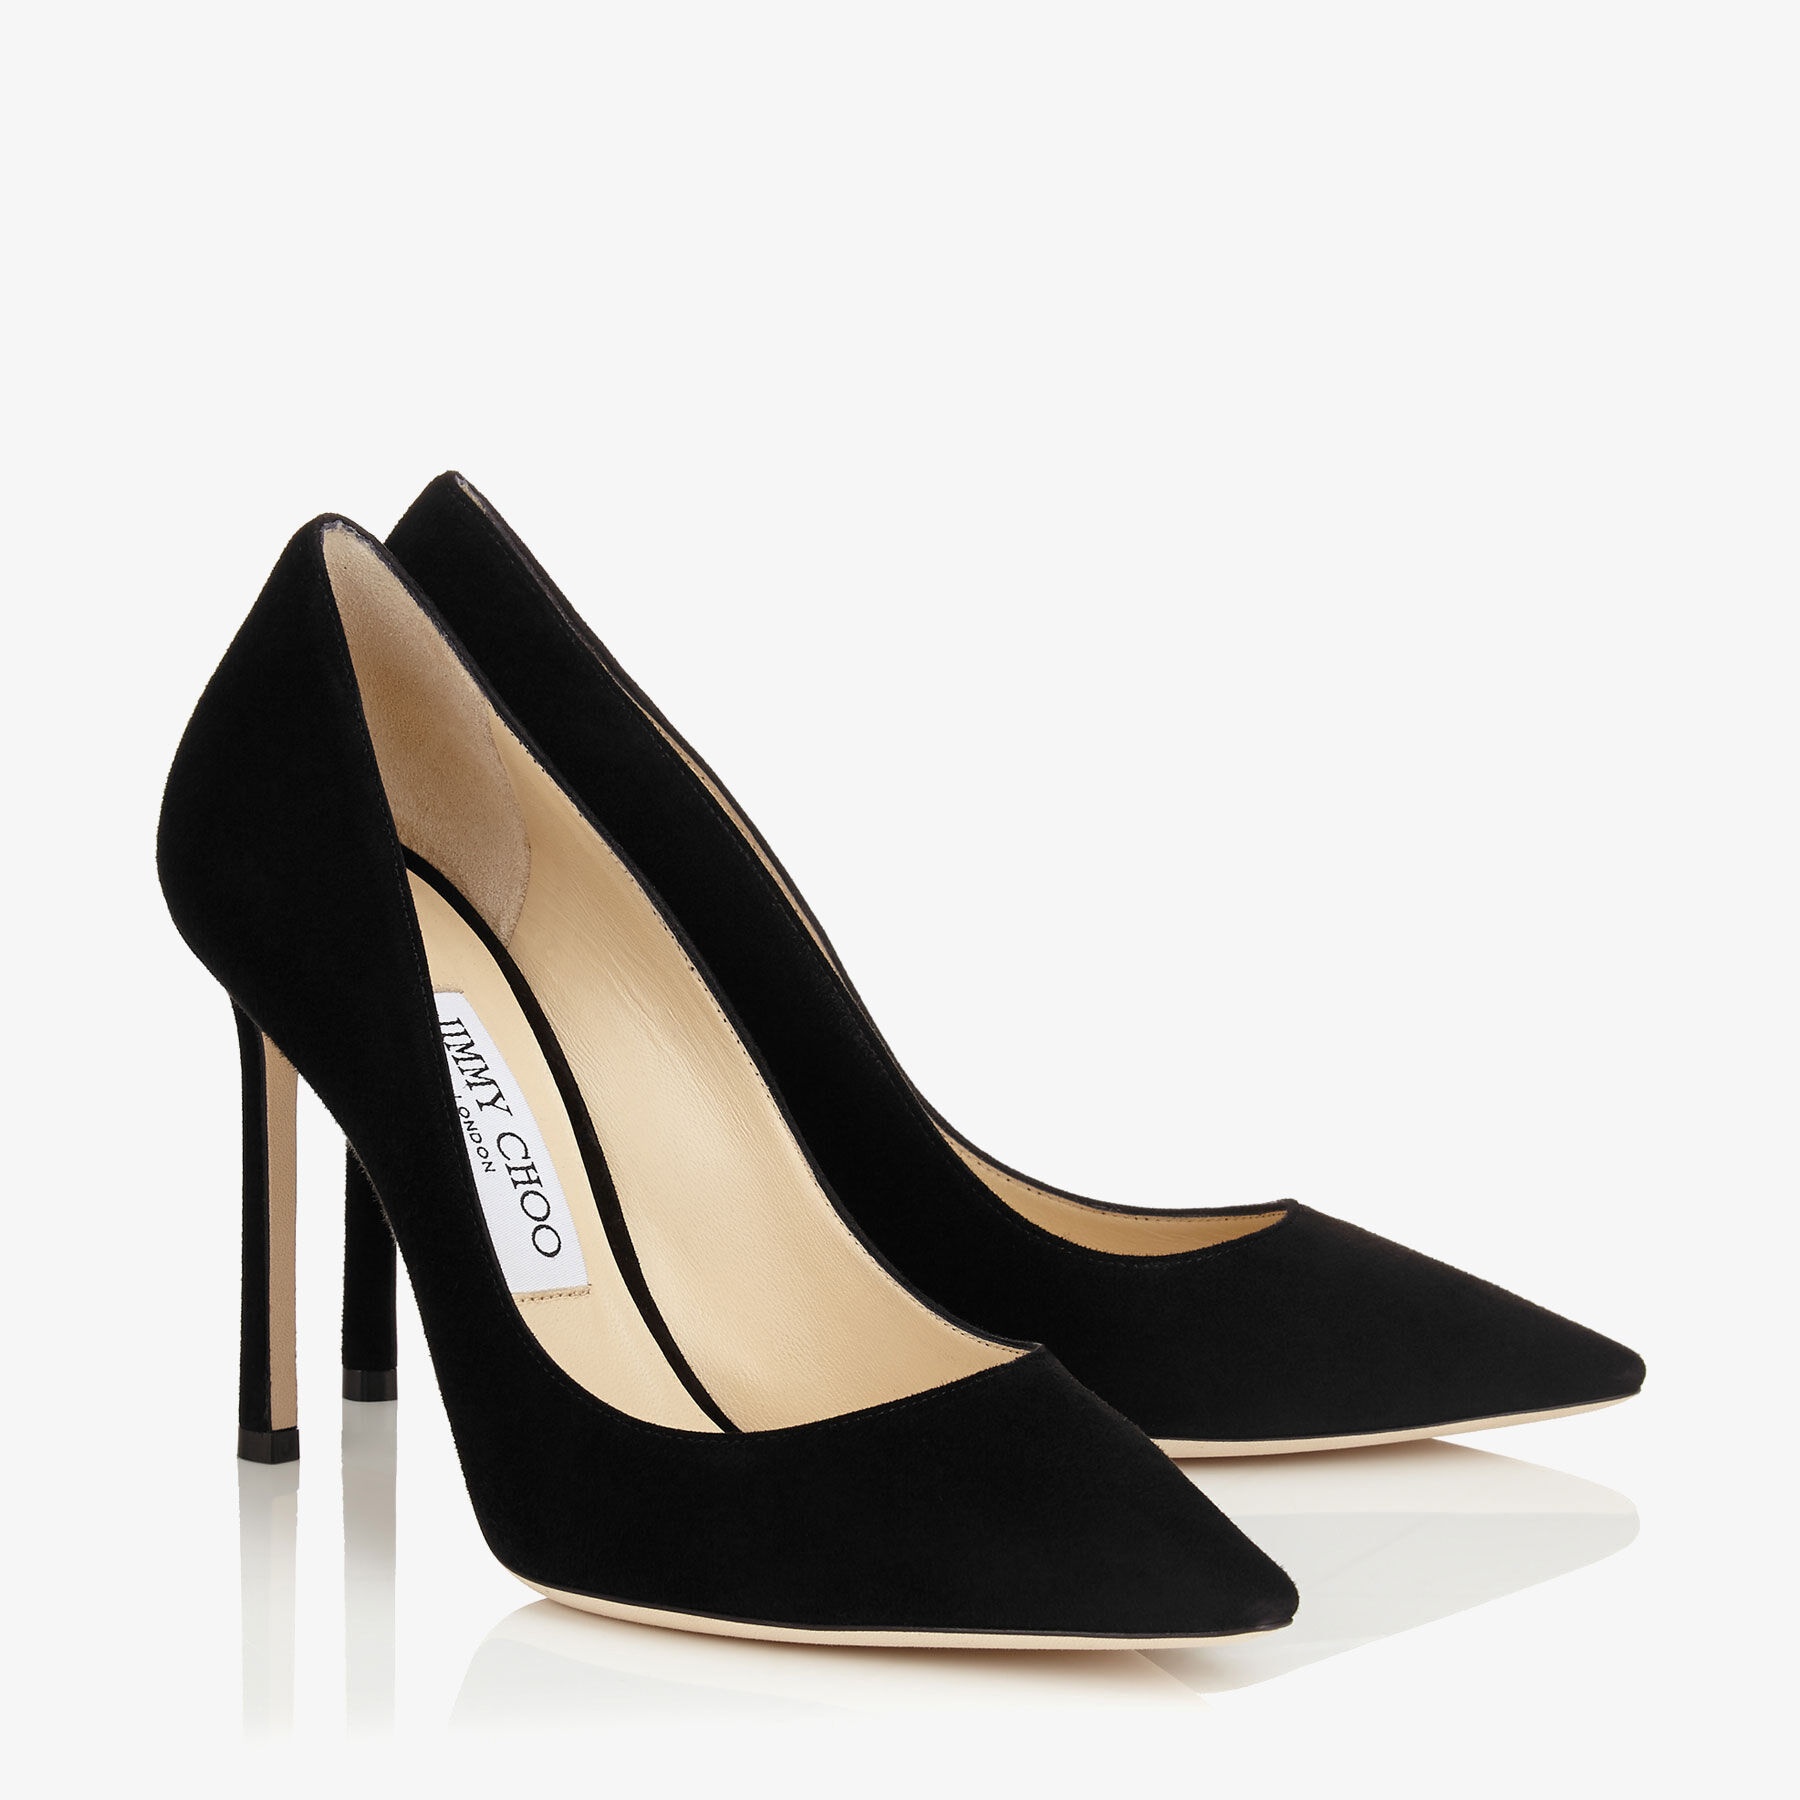 Romy 100
Black Suede Pointy Toe Pumps - 3